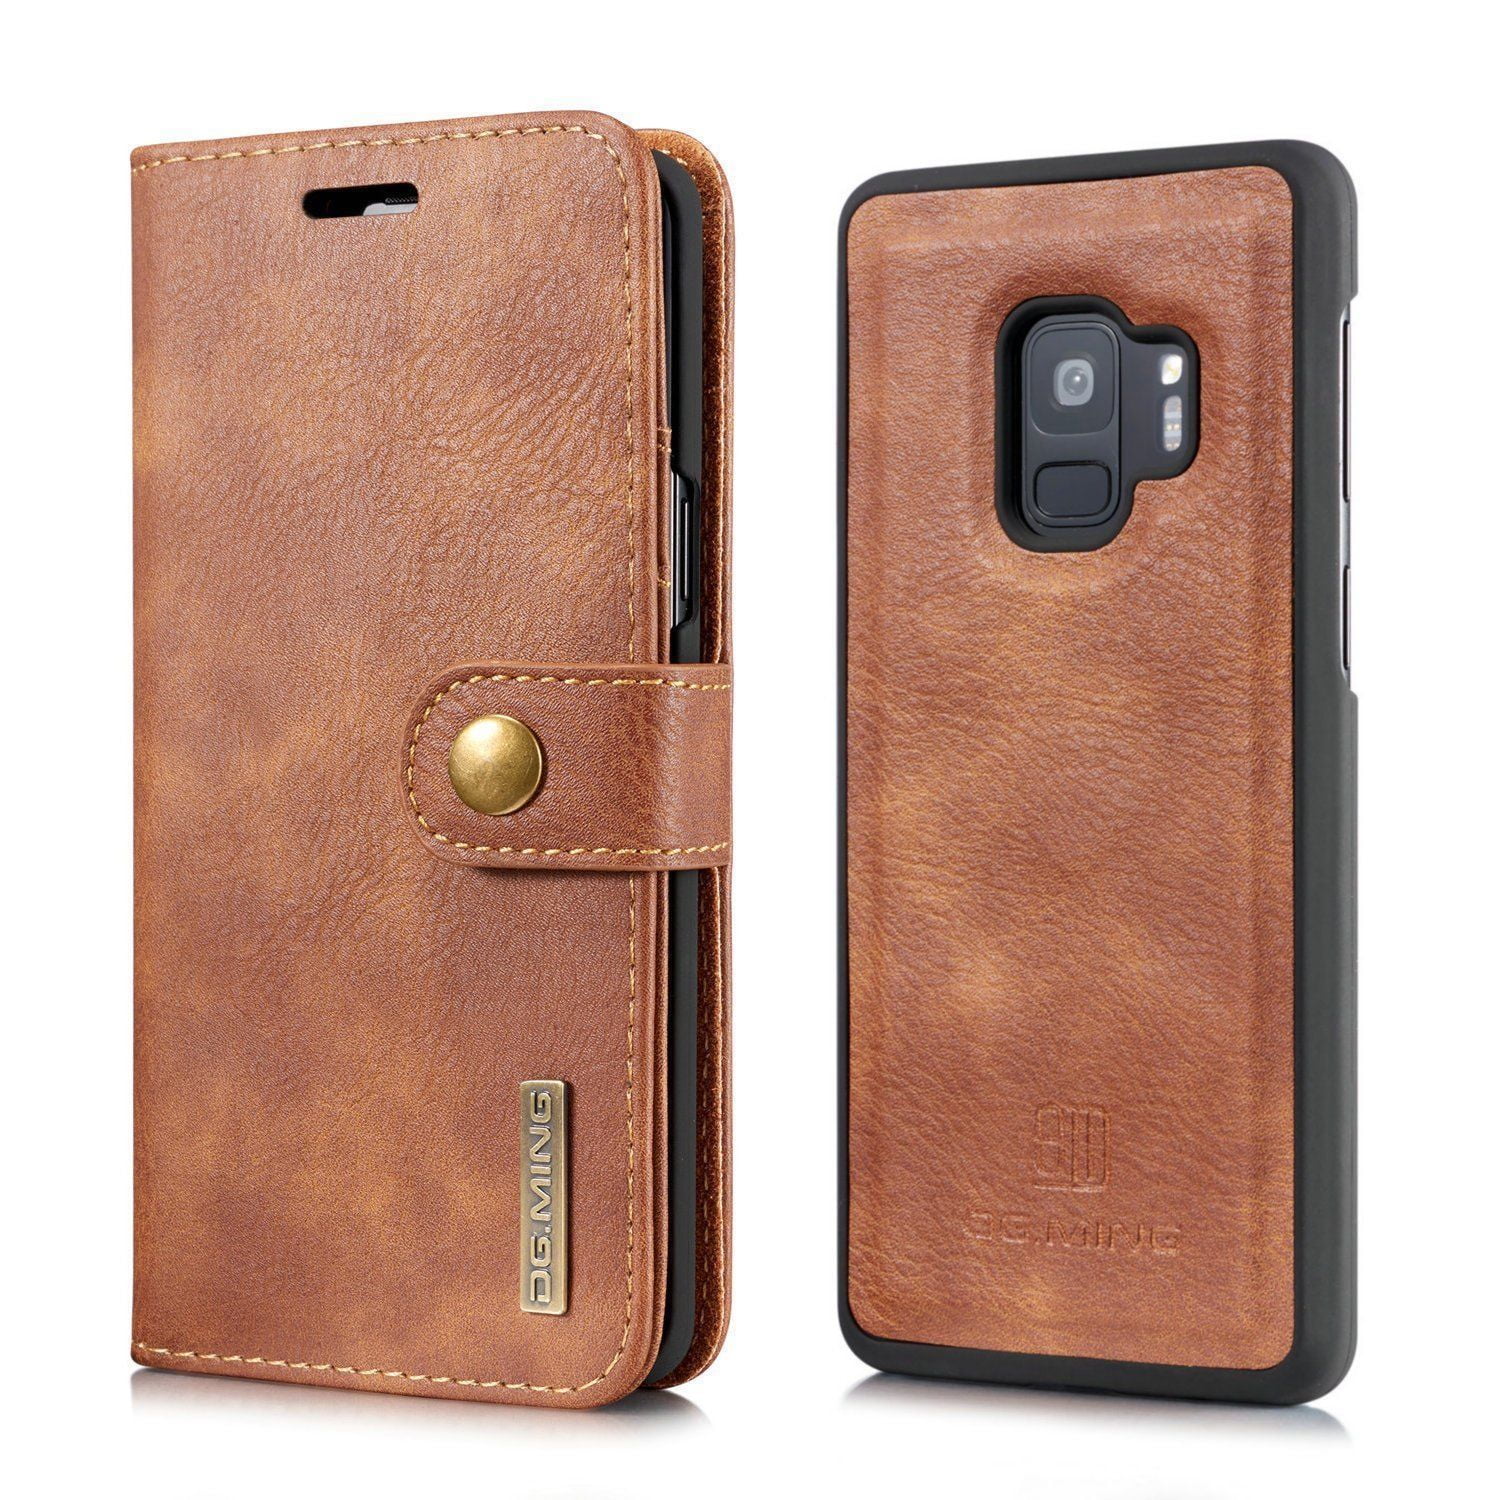 Cover for Leather Kickstand Mobile Phone Cover Extra-Durable Business Card Holders Flip Cover Samsung Galaxy S9 Flip Case 